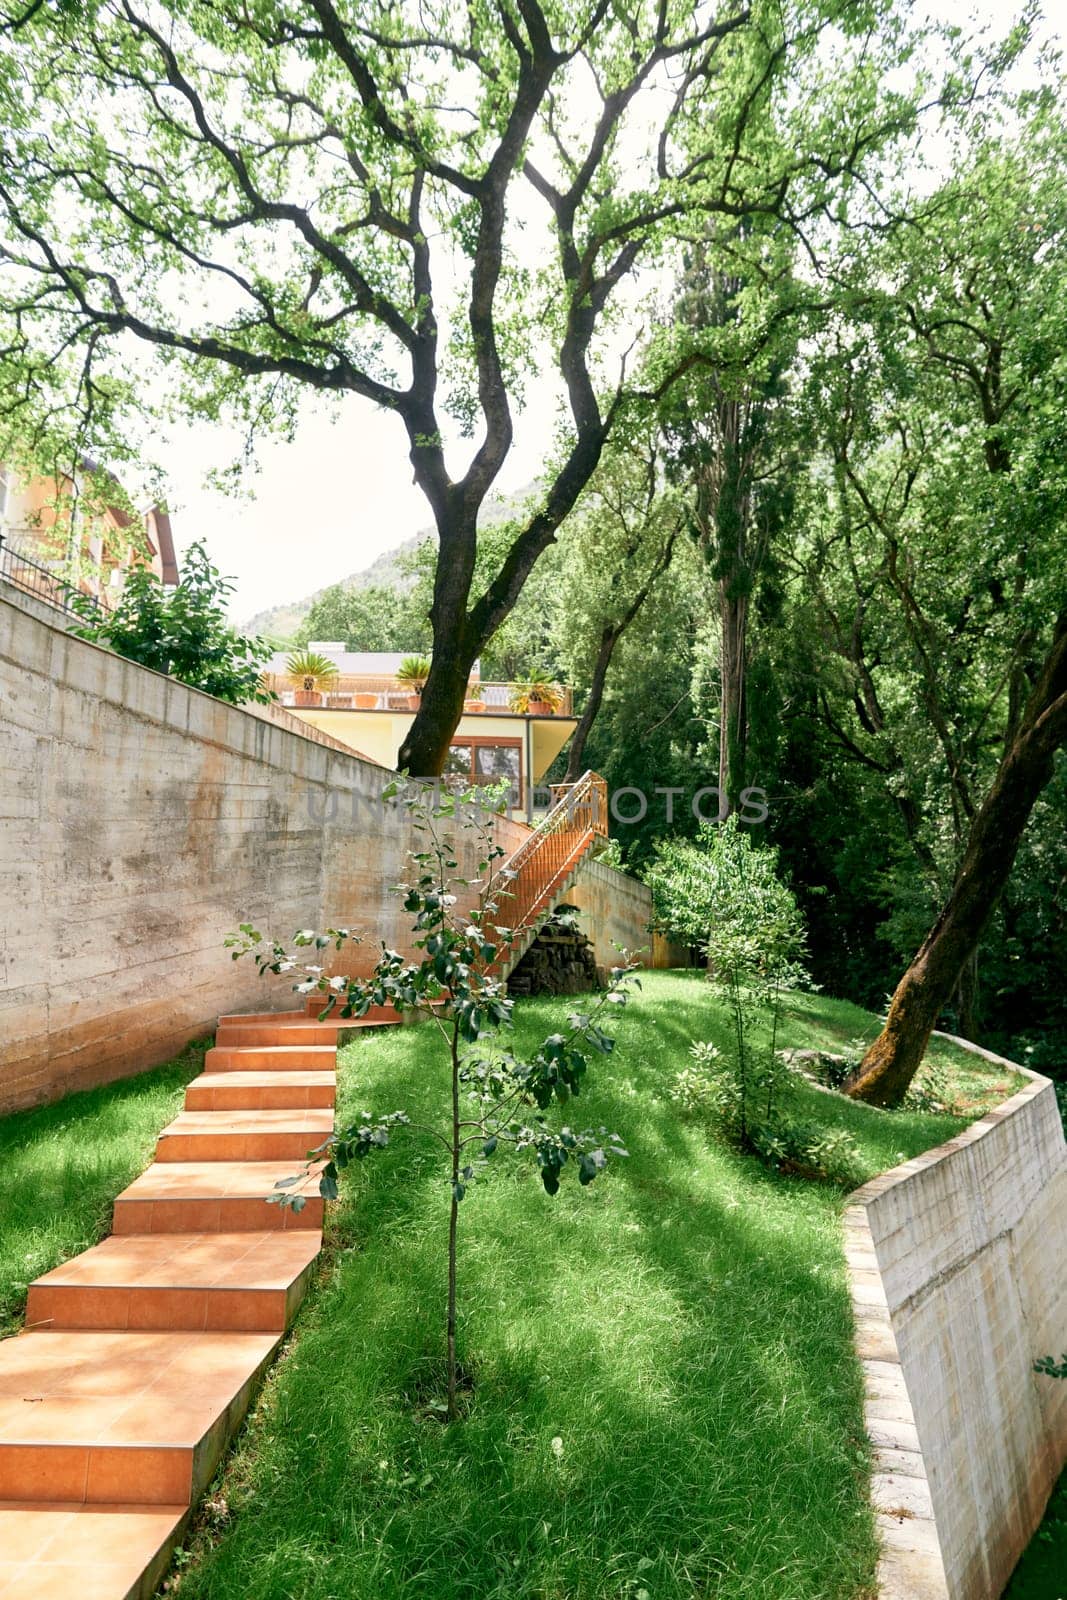 Tiled staircase in a green garden along a stone fence. High quality photo